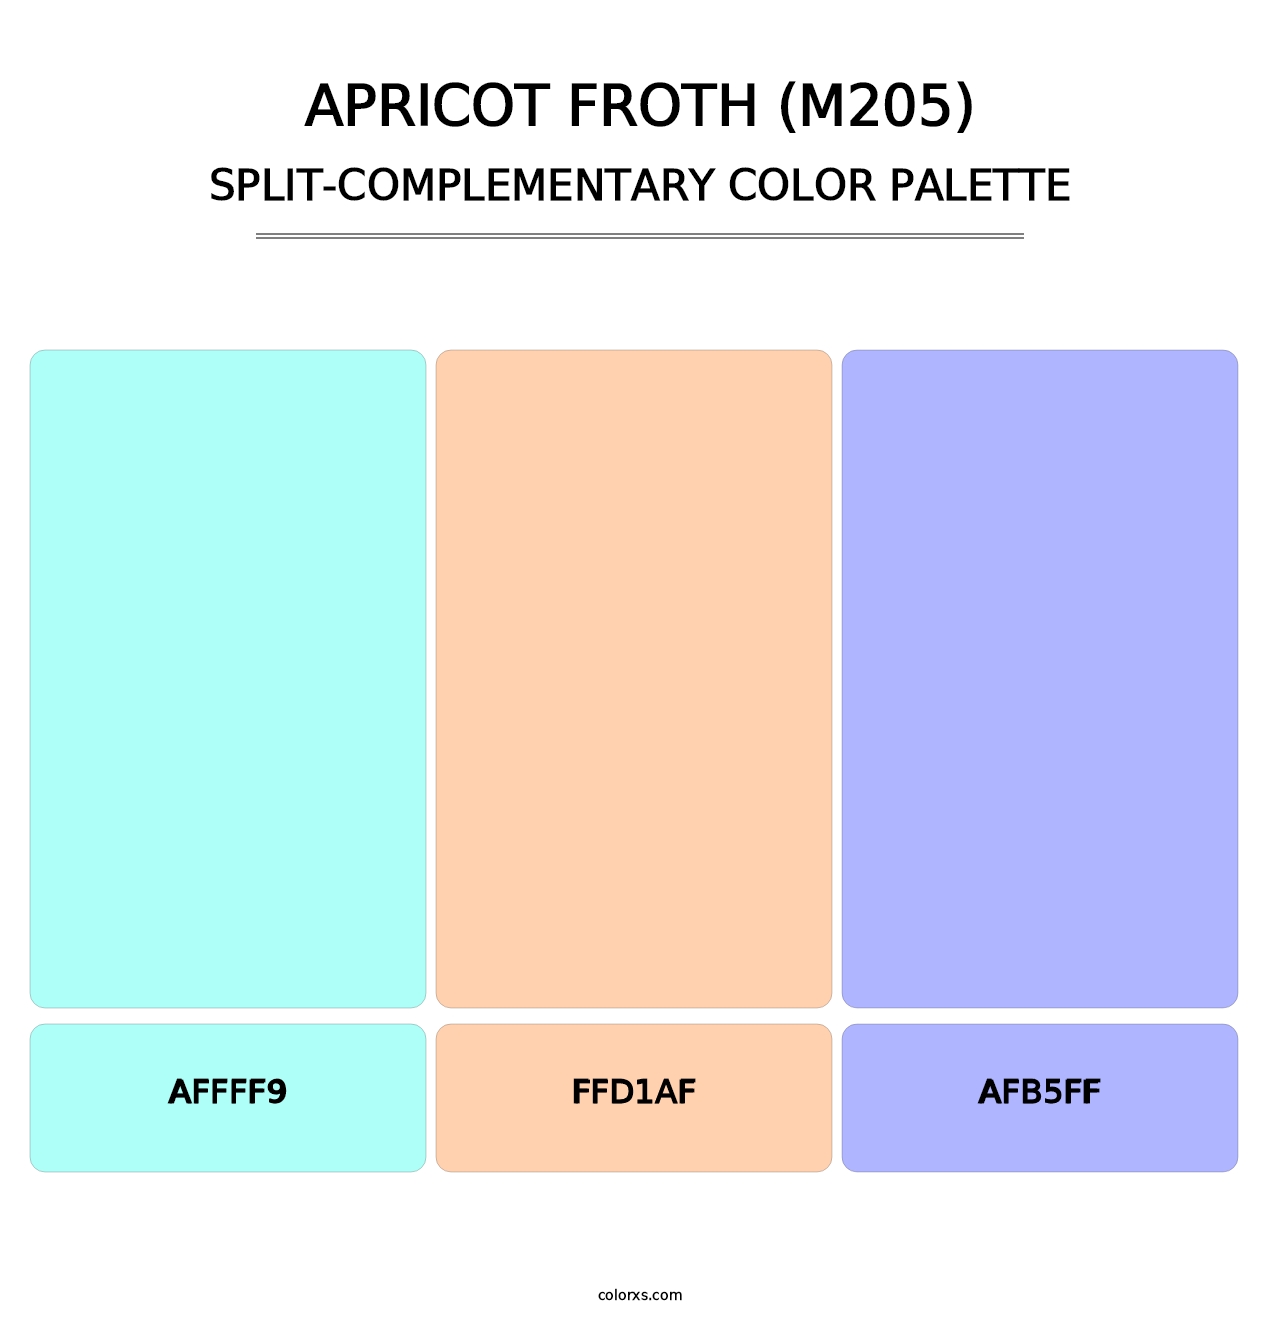 Apricot Froth (M205) - Split-Complementary Color Palette